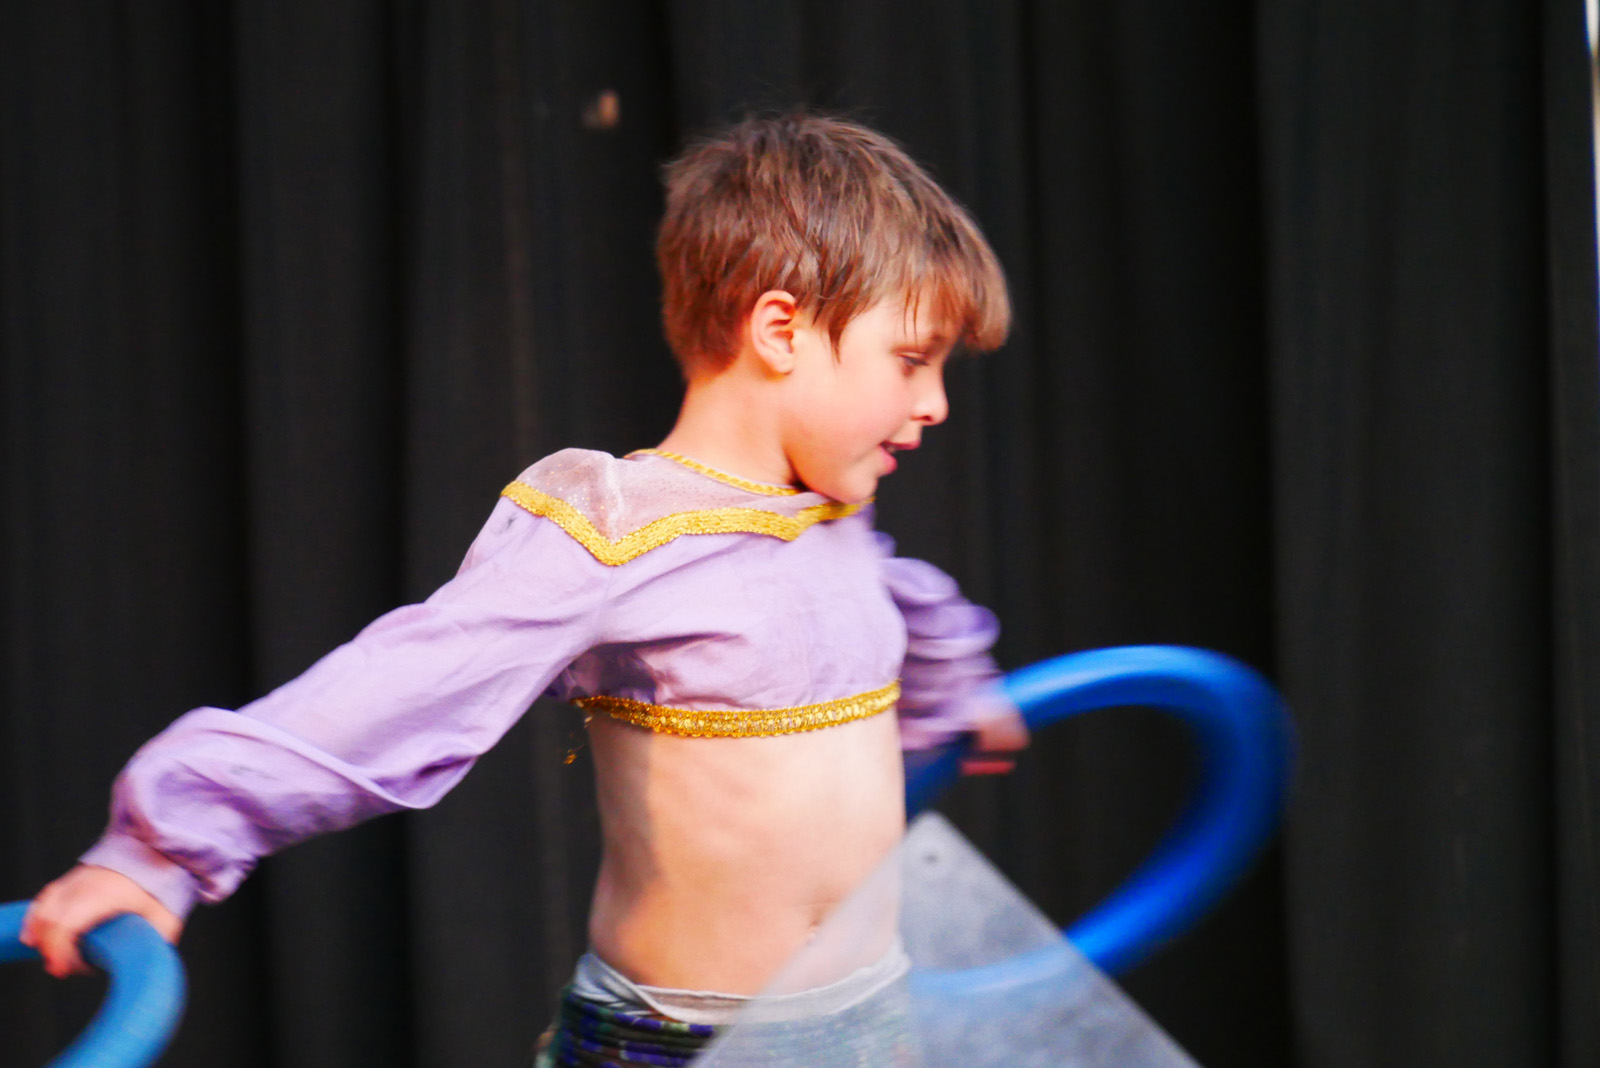 A camper performing a dance routine on stage